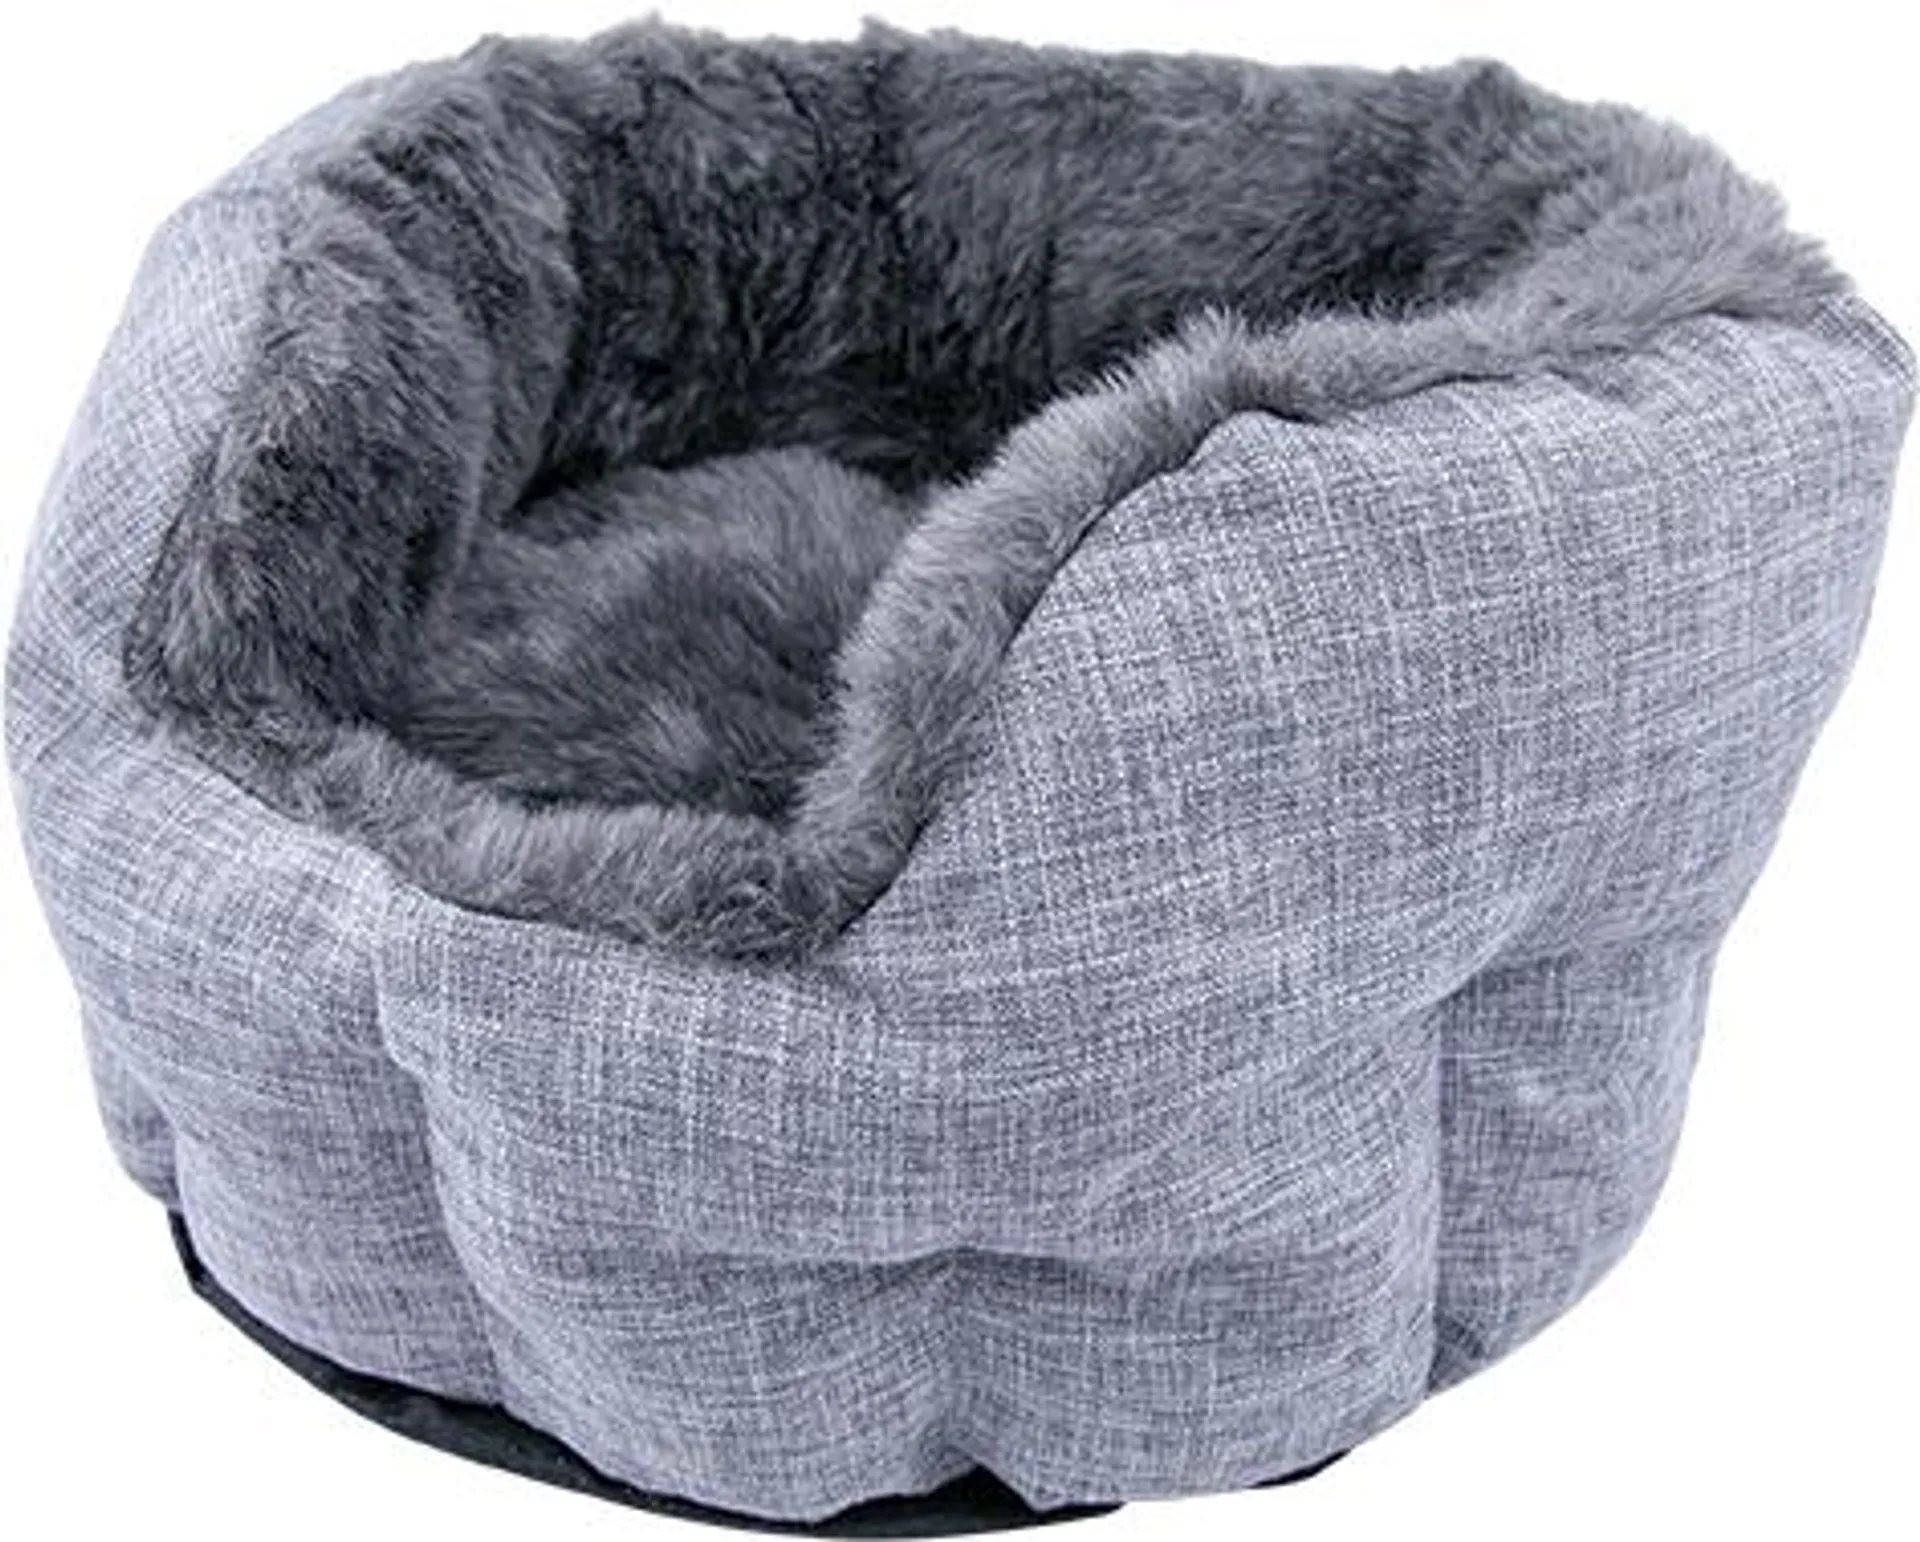 Play On Cat Bed Tall Tufted, Gray